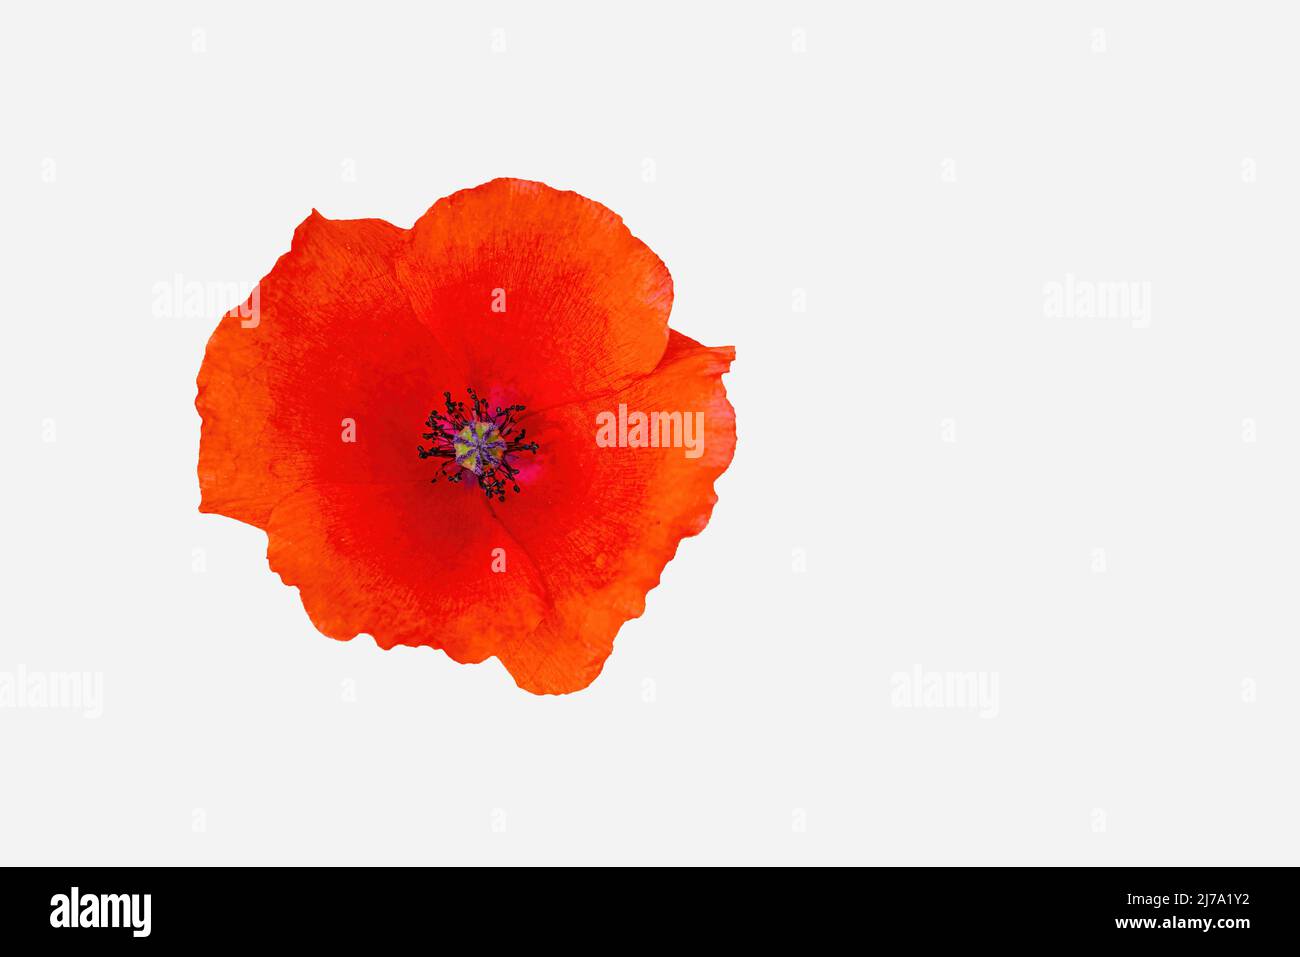 Papaver rhoeas, common names are common or corn poppy, corn rose, field poppy, Flanders poppy, and red poppy, isolated on white background with space Stock Photo